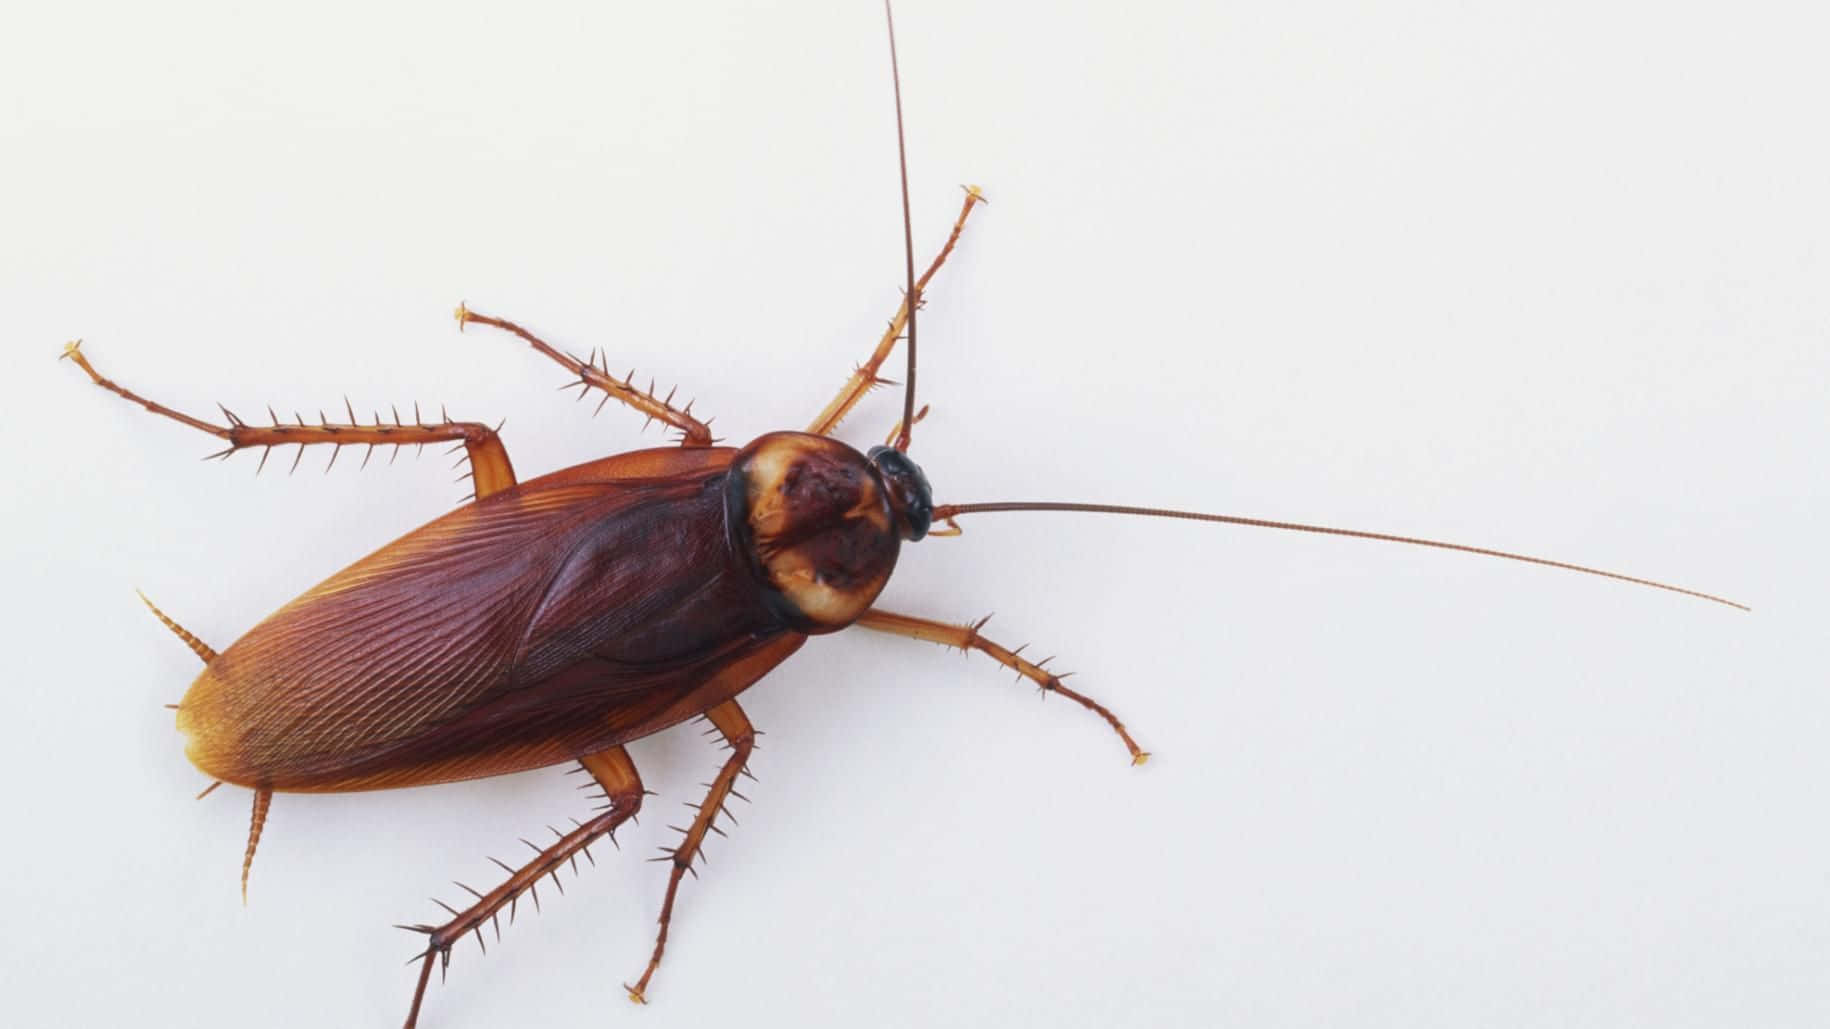 A Cockroach On A White Background